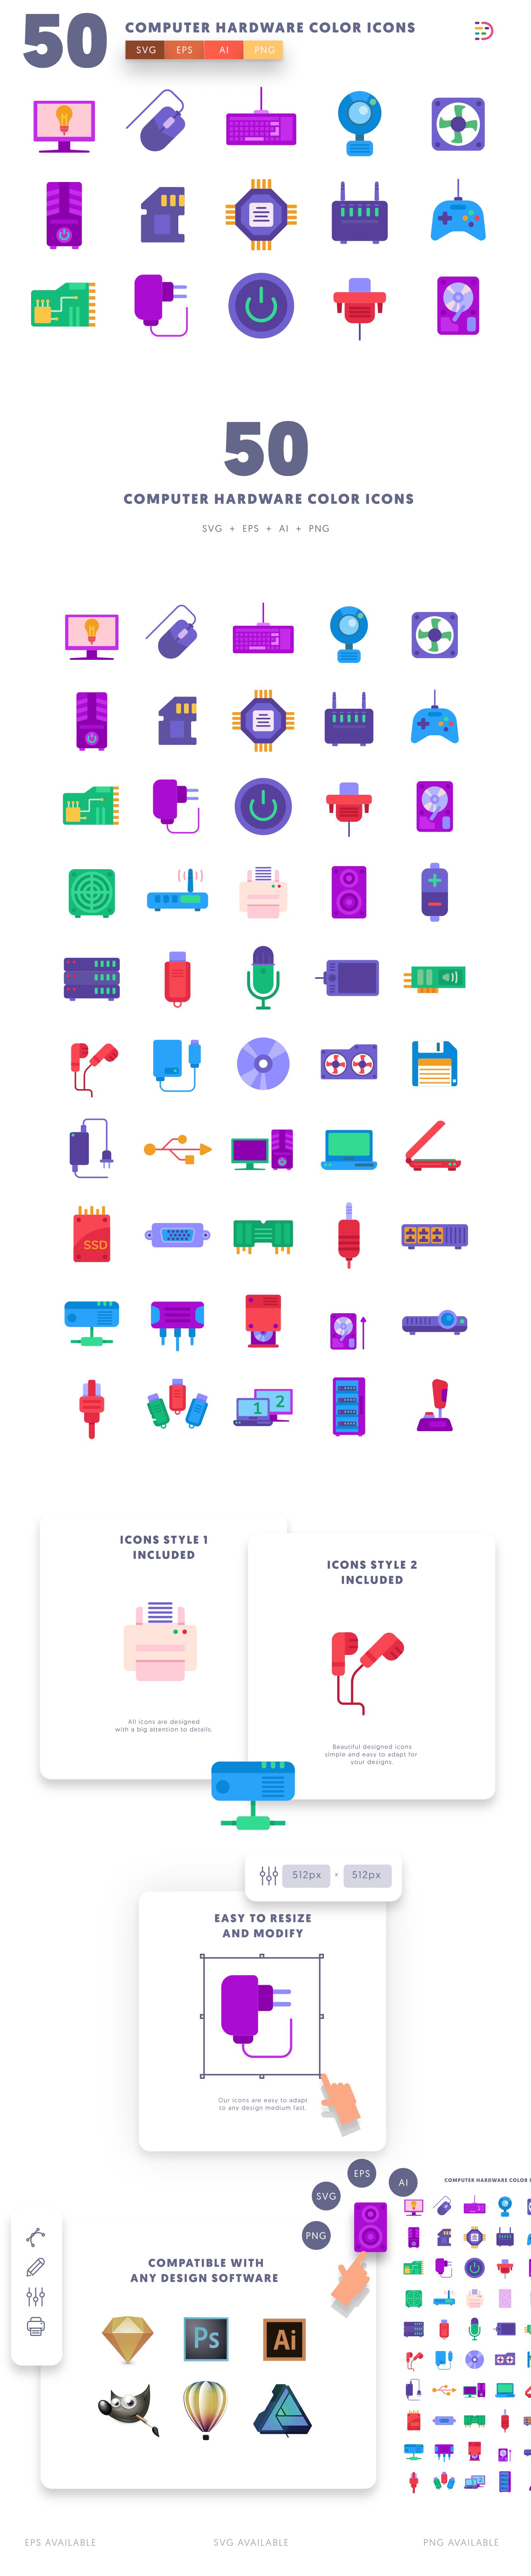 Editable computer hardware color icons icon pack, easy to edit and customize icons